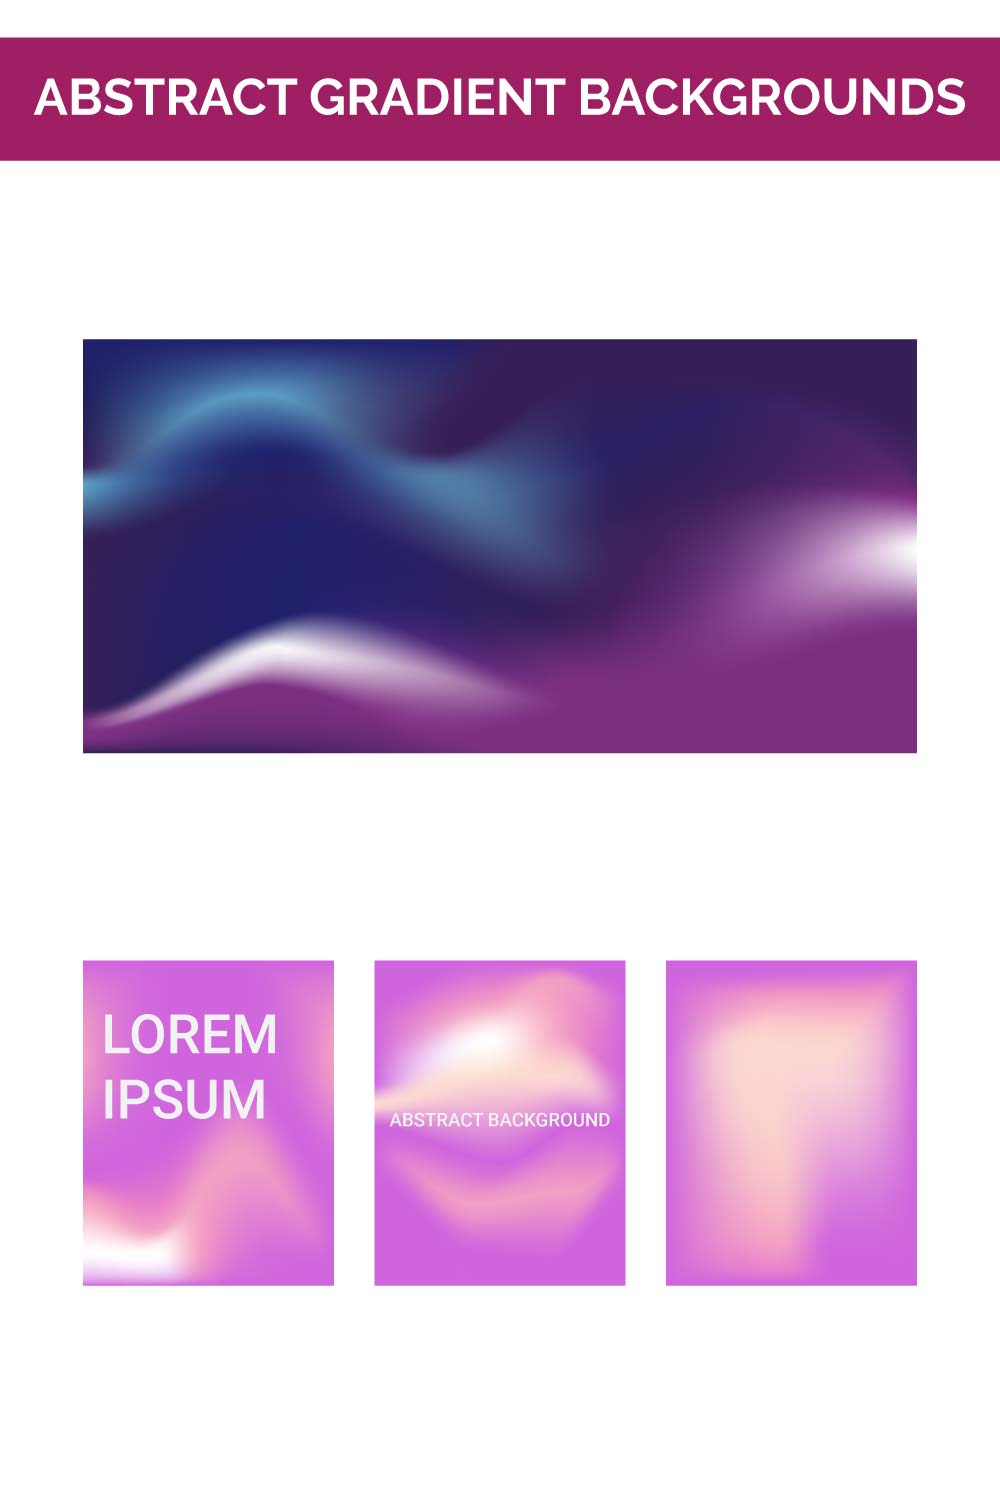 Abstract gradient vector backgrounds pinterest preview image.